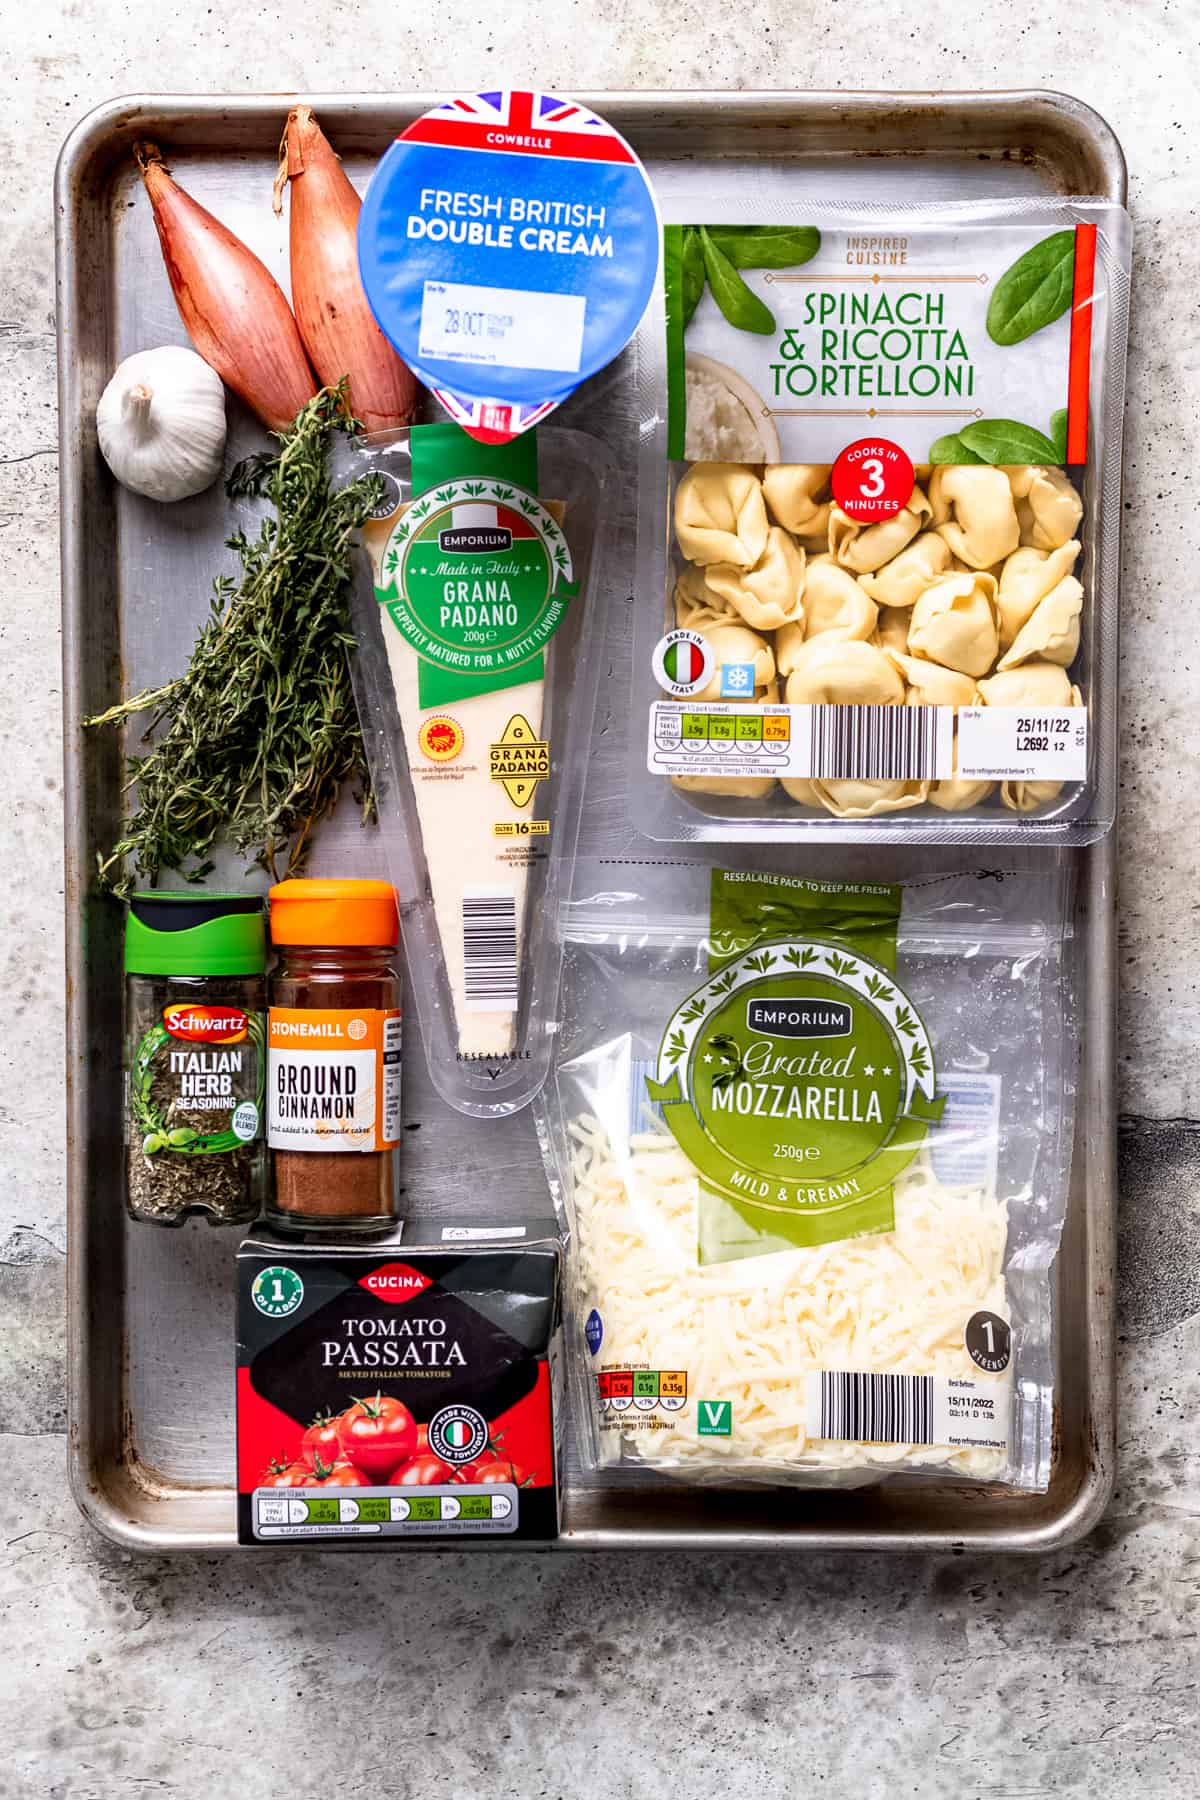 Aldi ingredients for baked cheese tortellini.